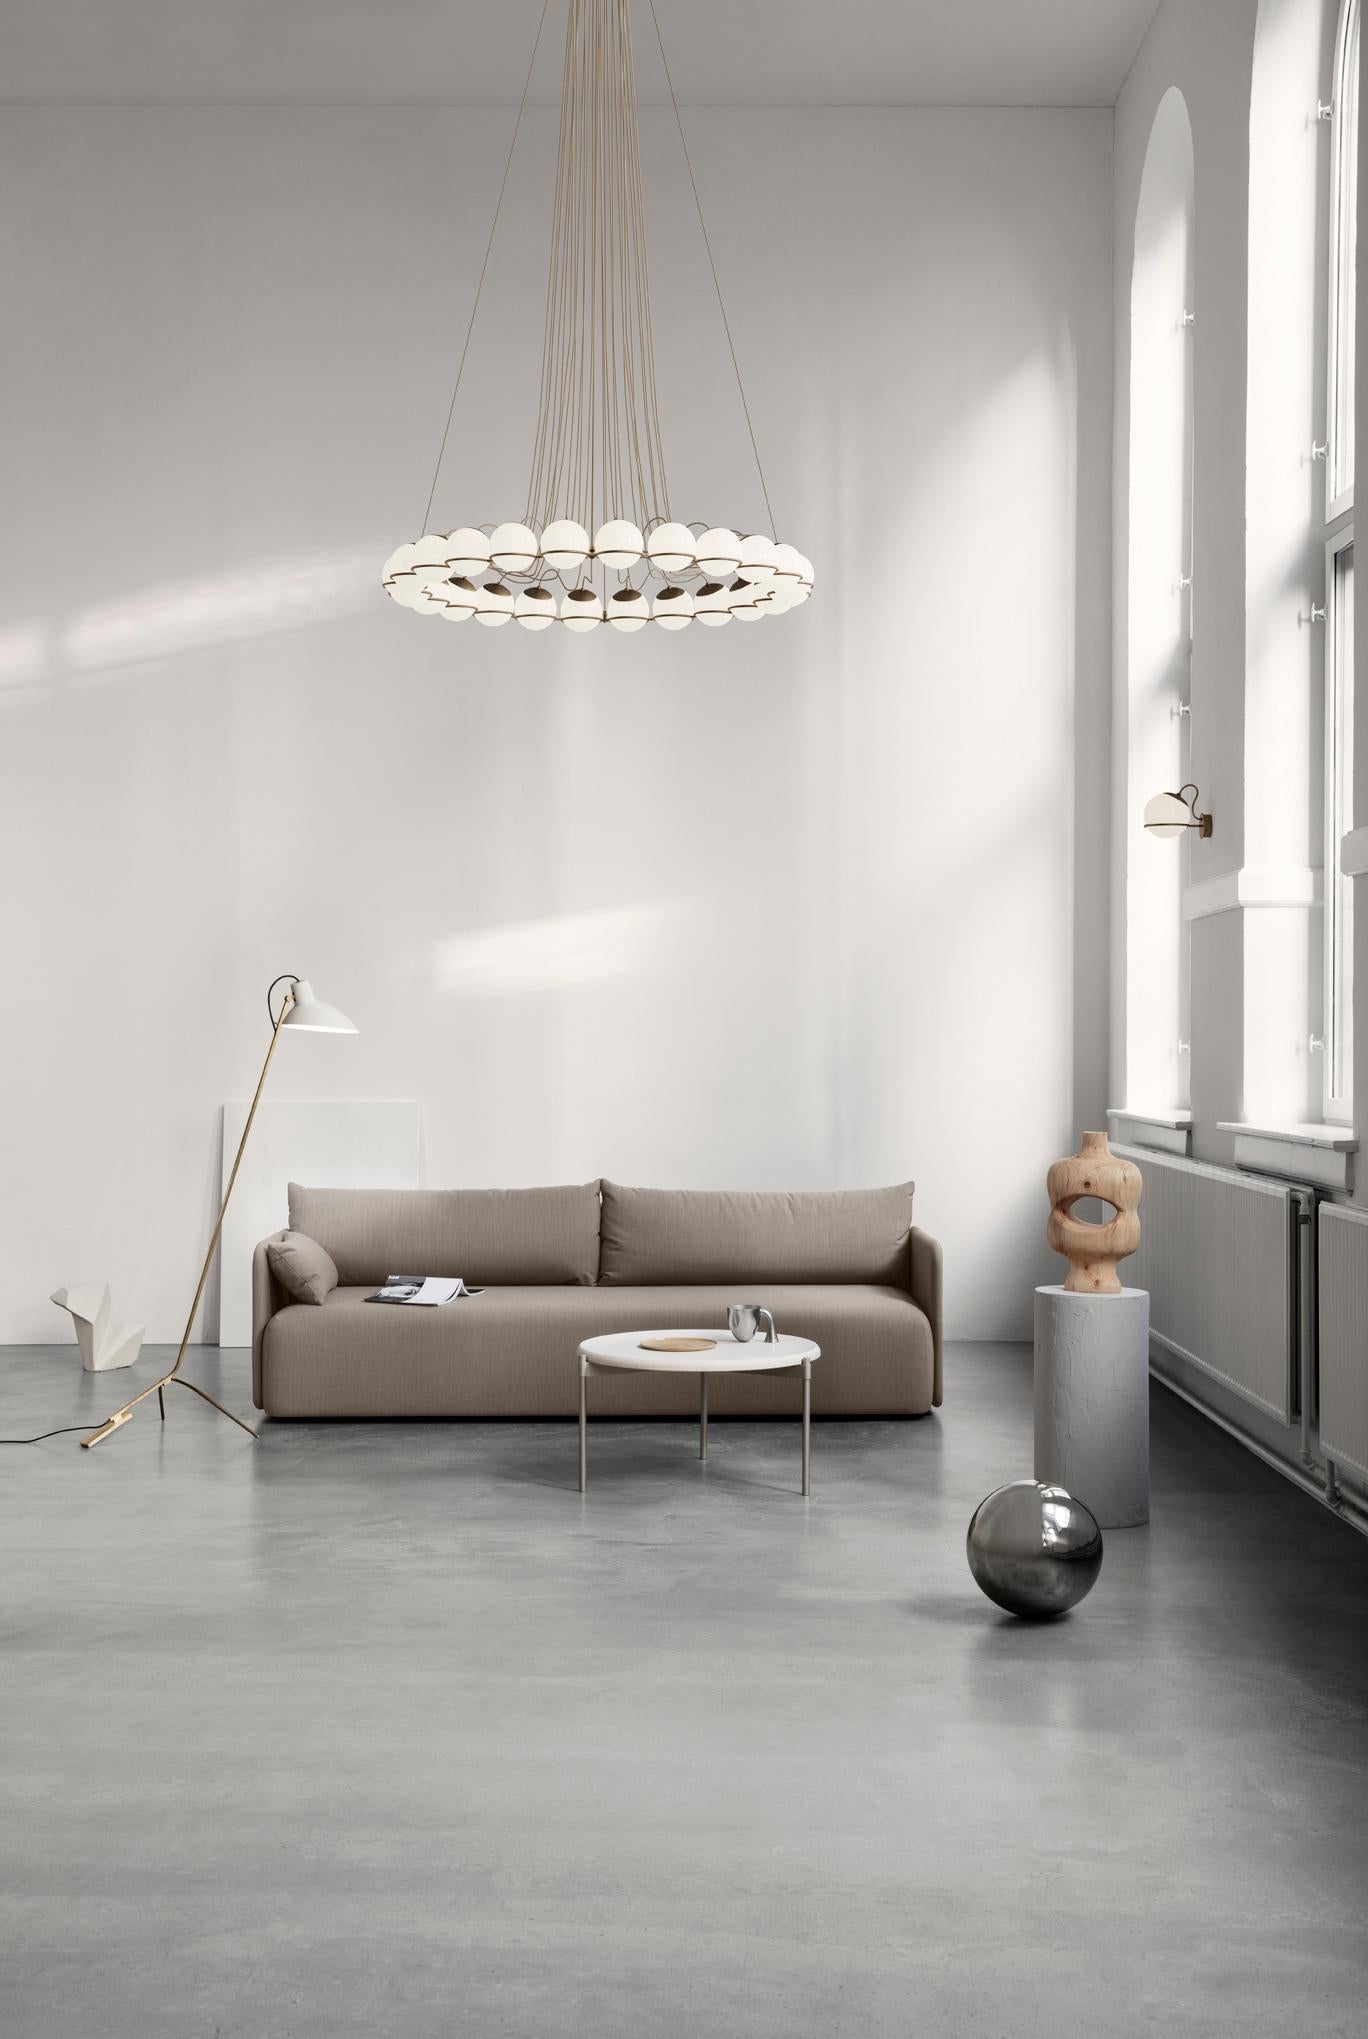 Monumental Gino Sarfatti Model 2109/24/14 chandelier in champagne for Astep. 

This Astep re-edition of Gino Sarfatti's iconic design faithfully pays homage to his minimalistic yet innovative approach to lighting. Composed of 24 hand-blown glass